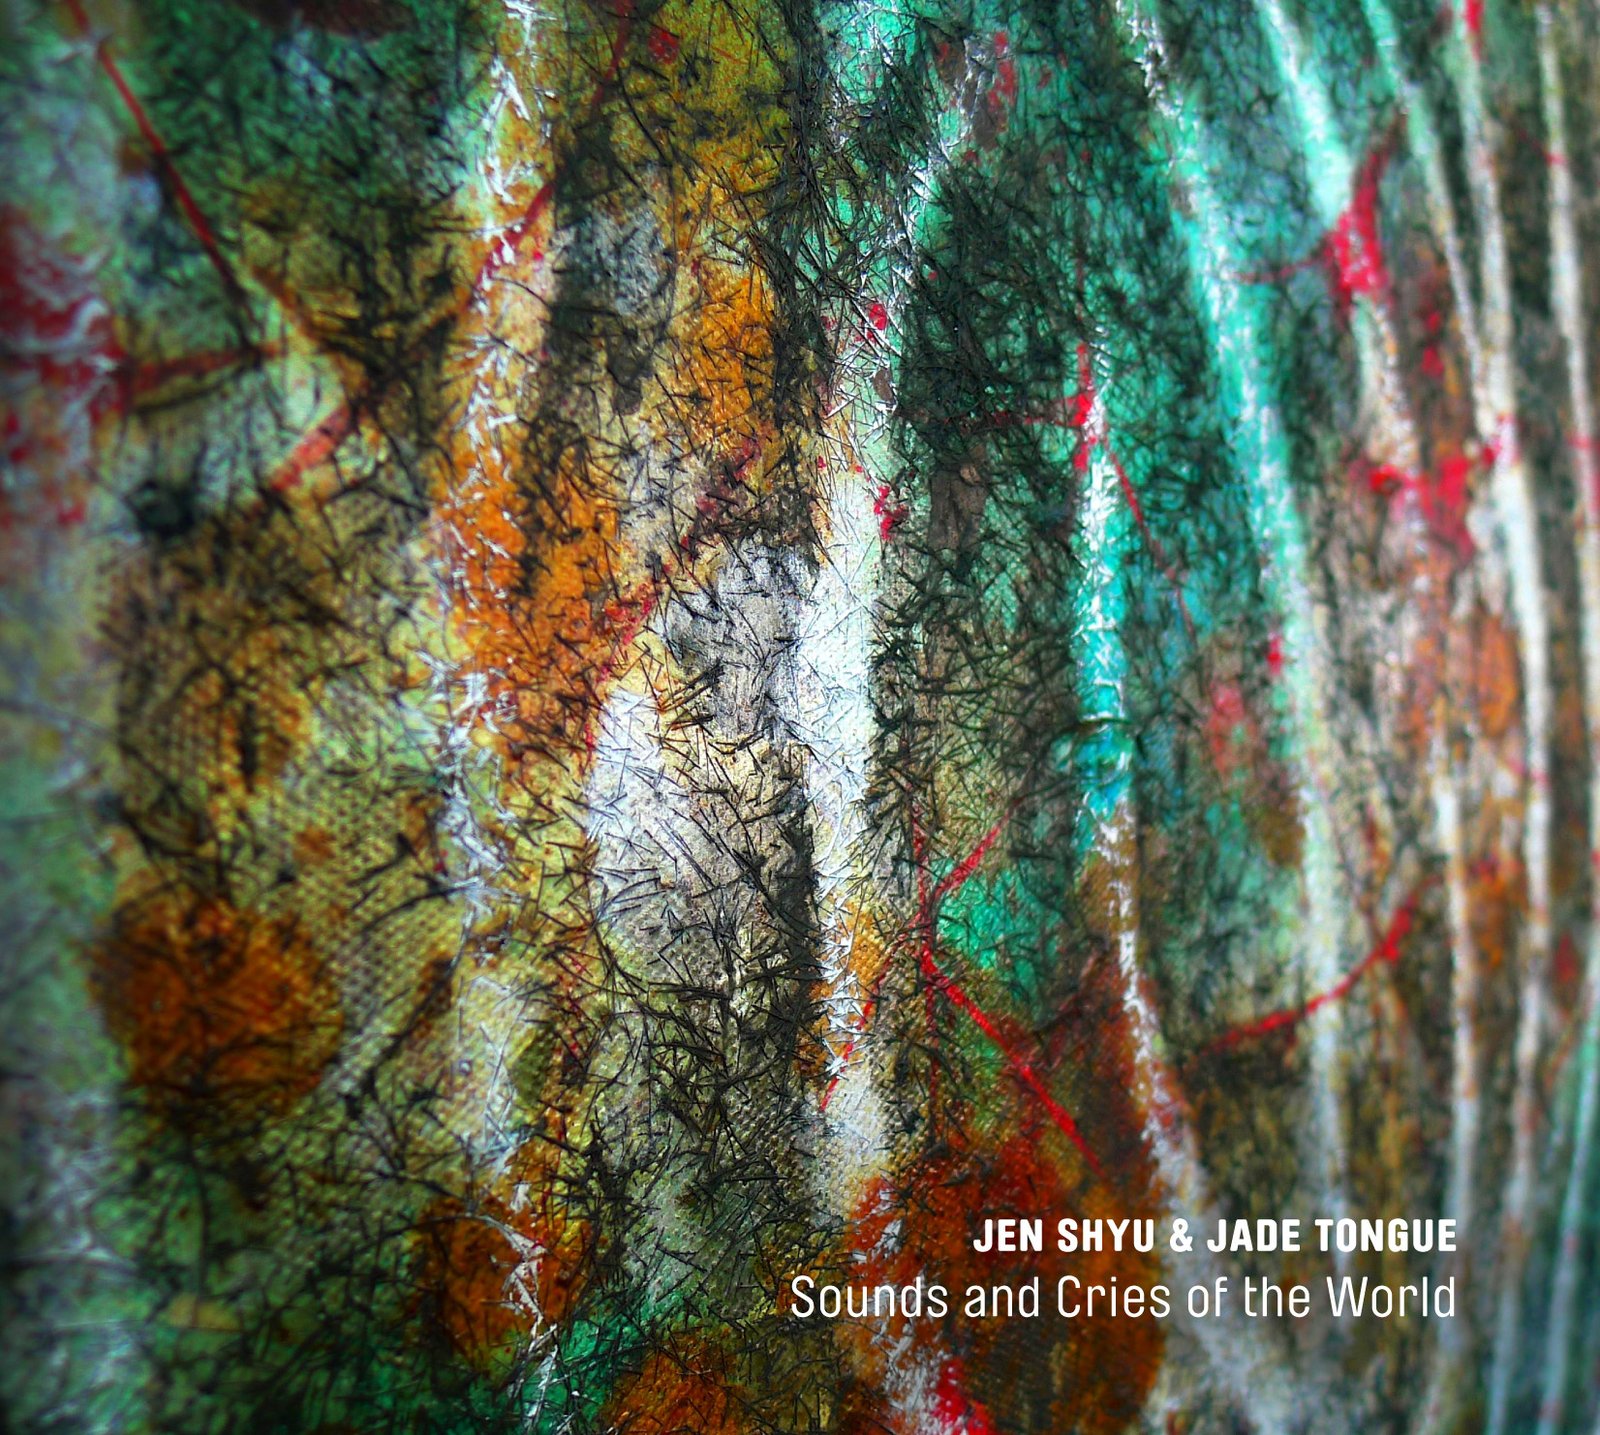 Sounds and Cries of the World - Jen Shyu